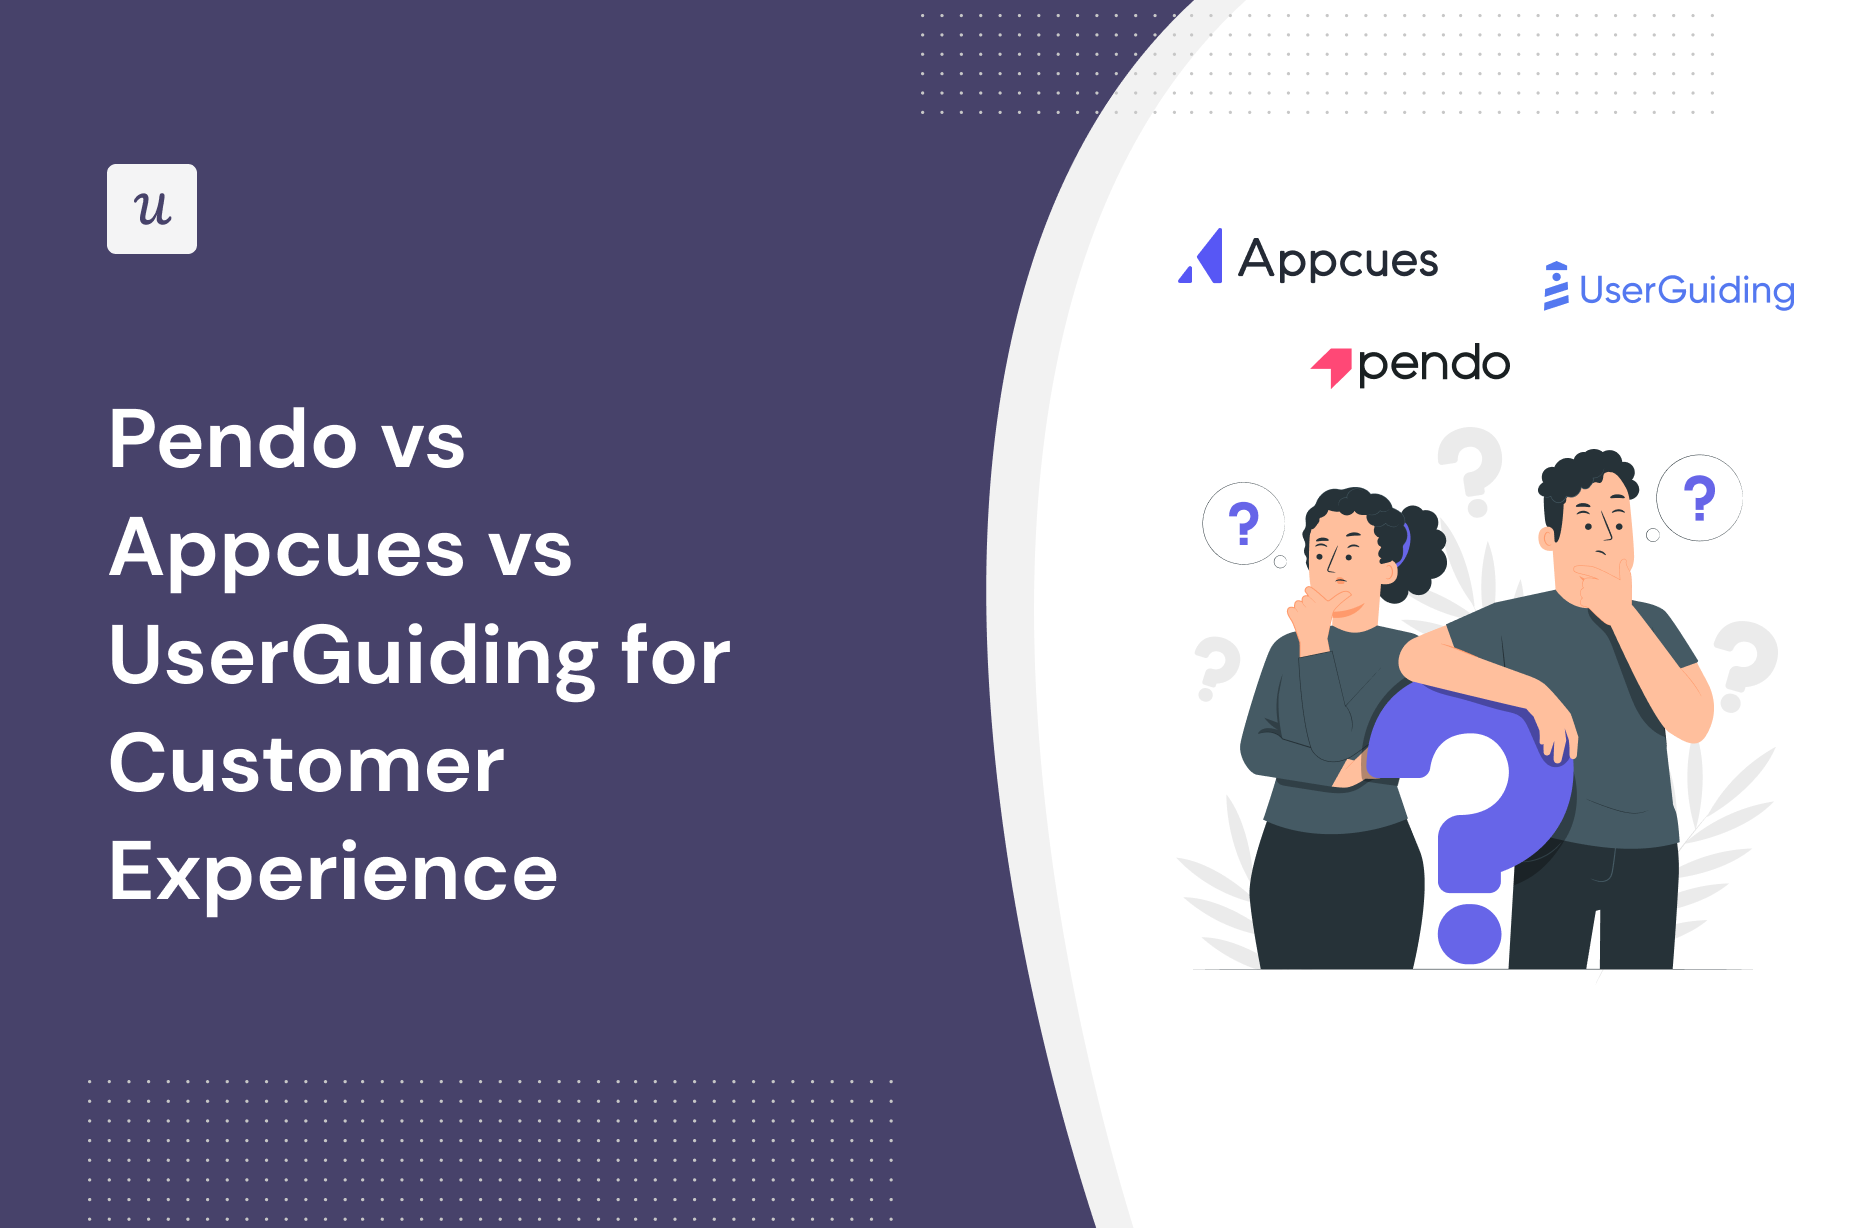 Pendo vs Appcues vs UserGuiding for Customer Experience